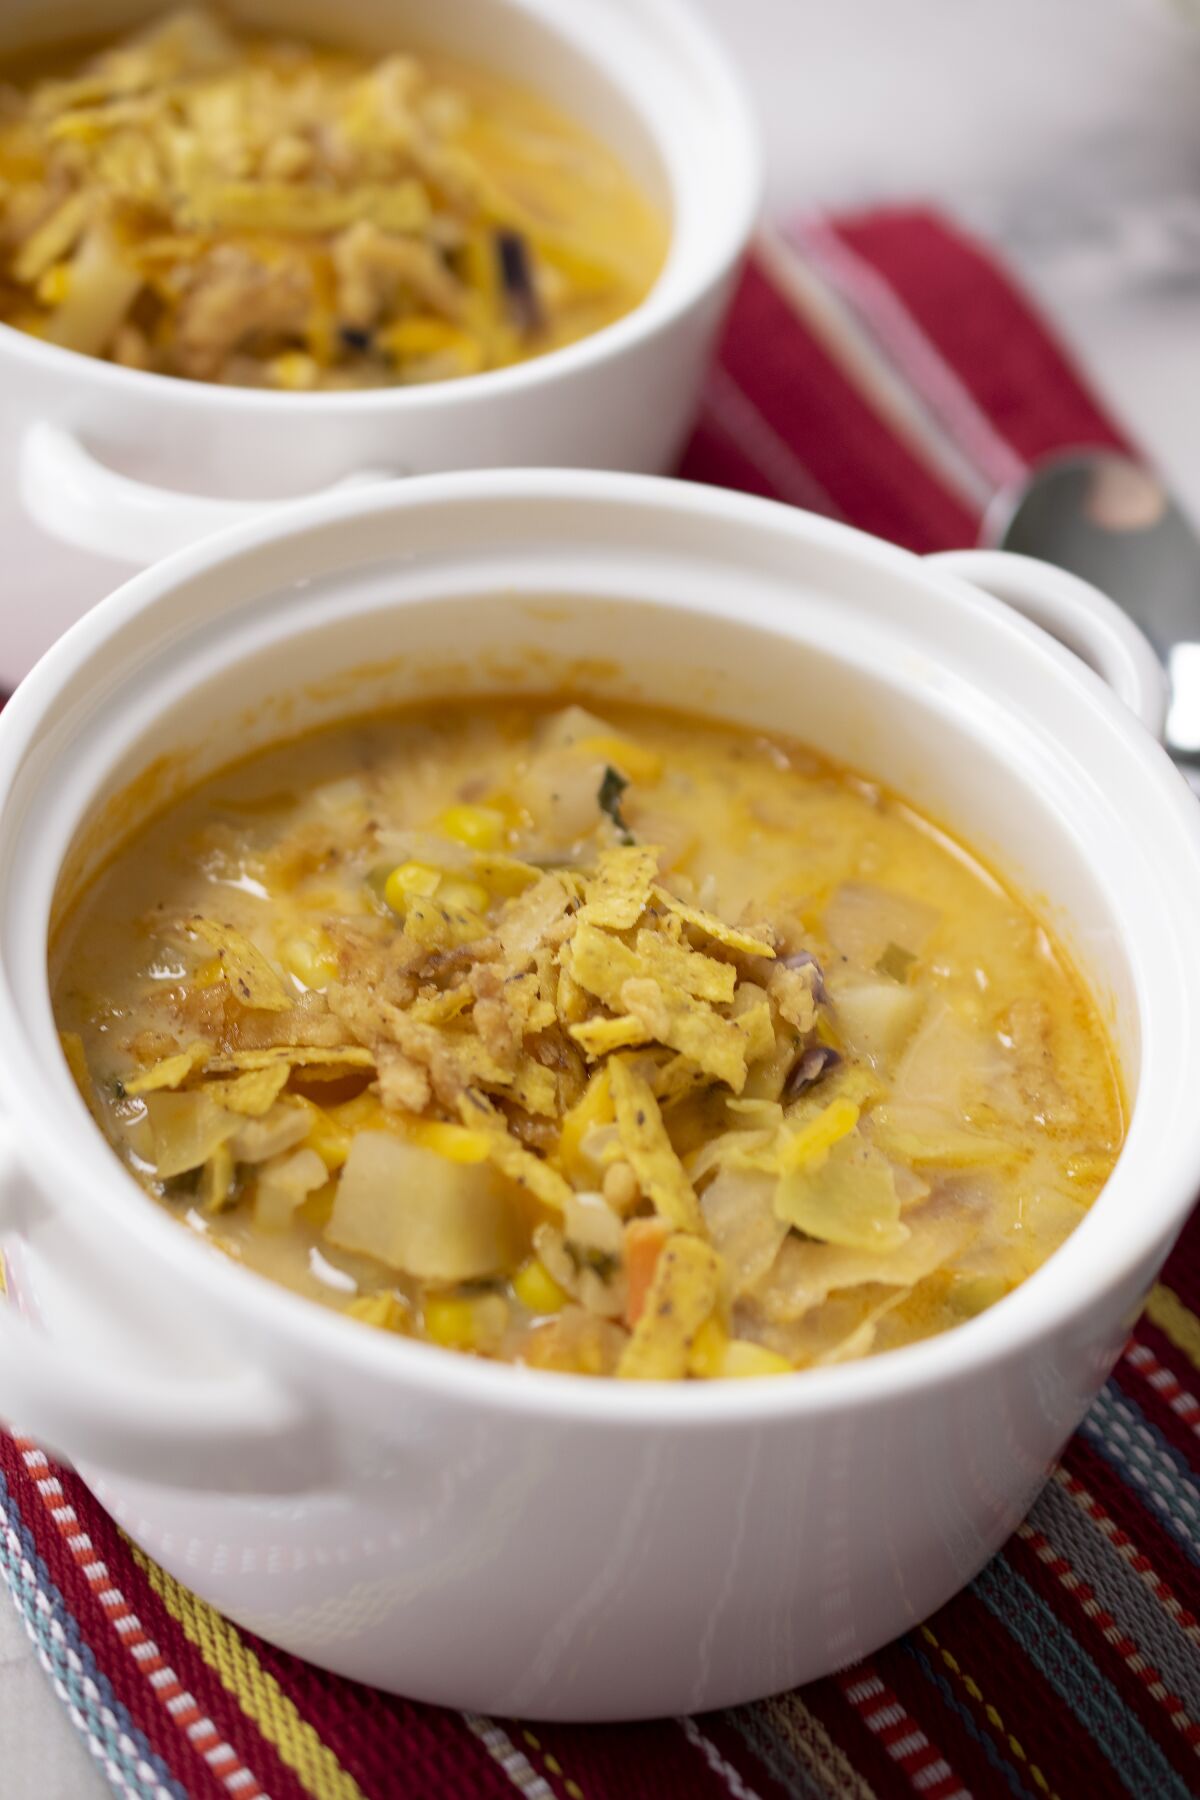 Barbecue Corn and Potato Chowder is a quick and easy meal for those cool fall evenings.